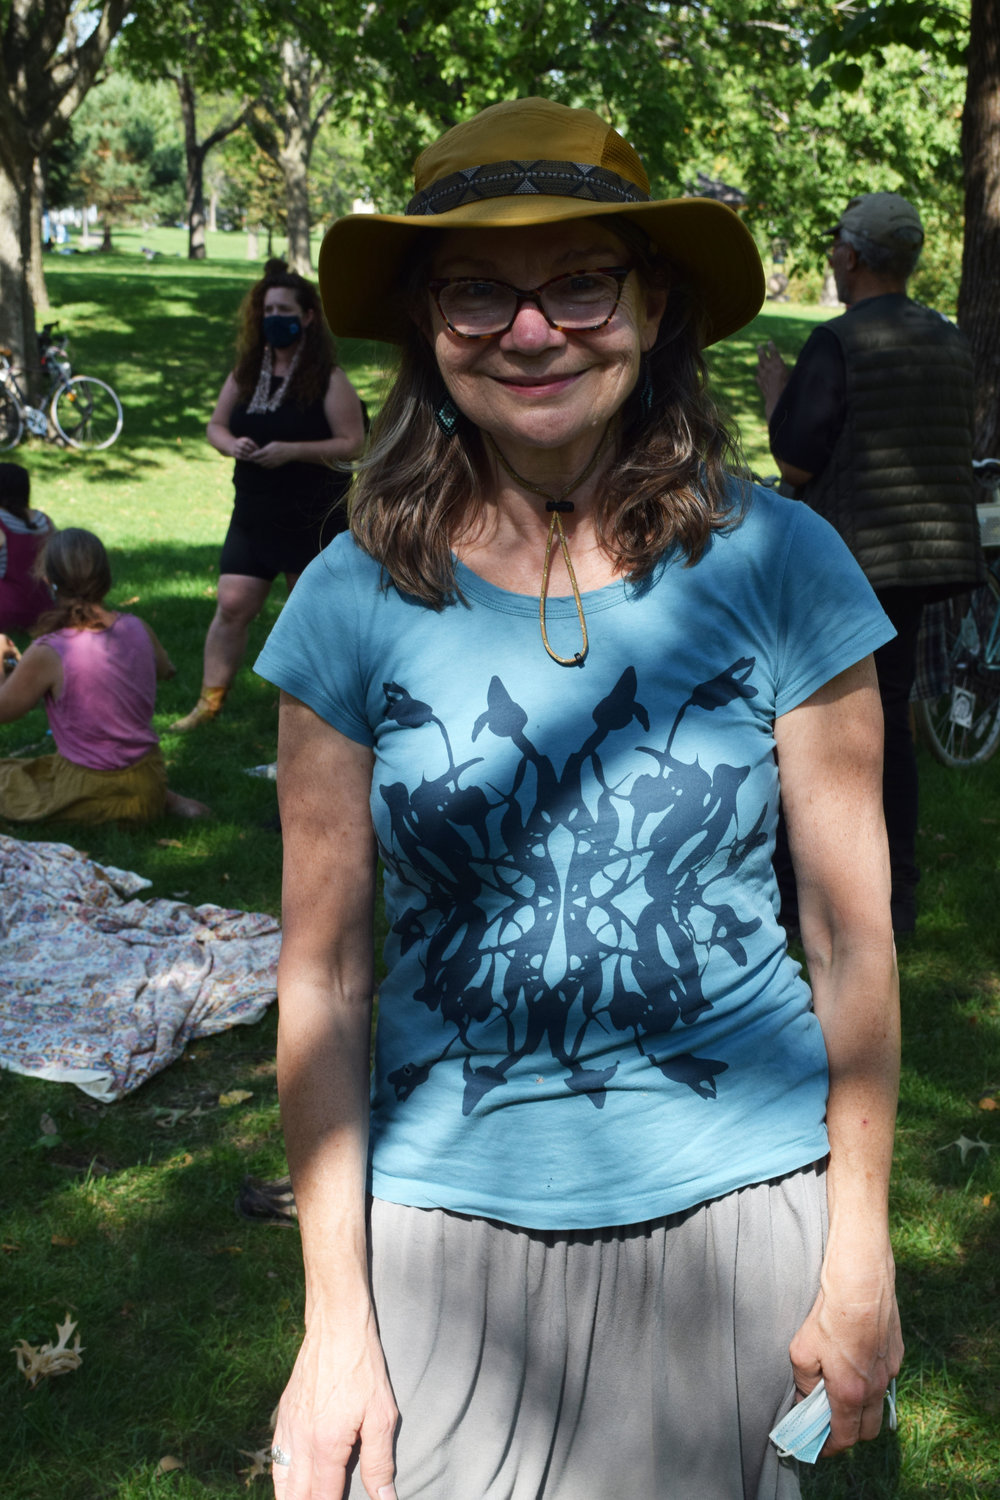 Returning artist and former BareBones Board Member Marian Lucas attends the community gathering at Powderhorn Park. "It's been hard being the only deaf person, but people make me feel welcome. We try to communicate. We can create life together. It's been a fun experience for me." (Photo by Jill Boogren)